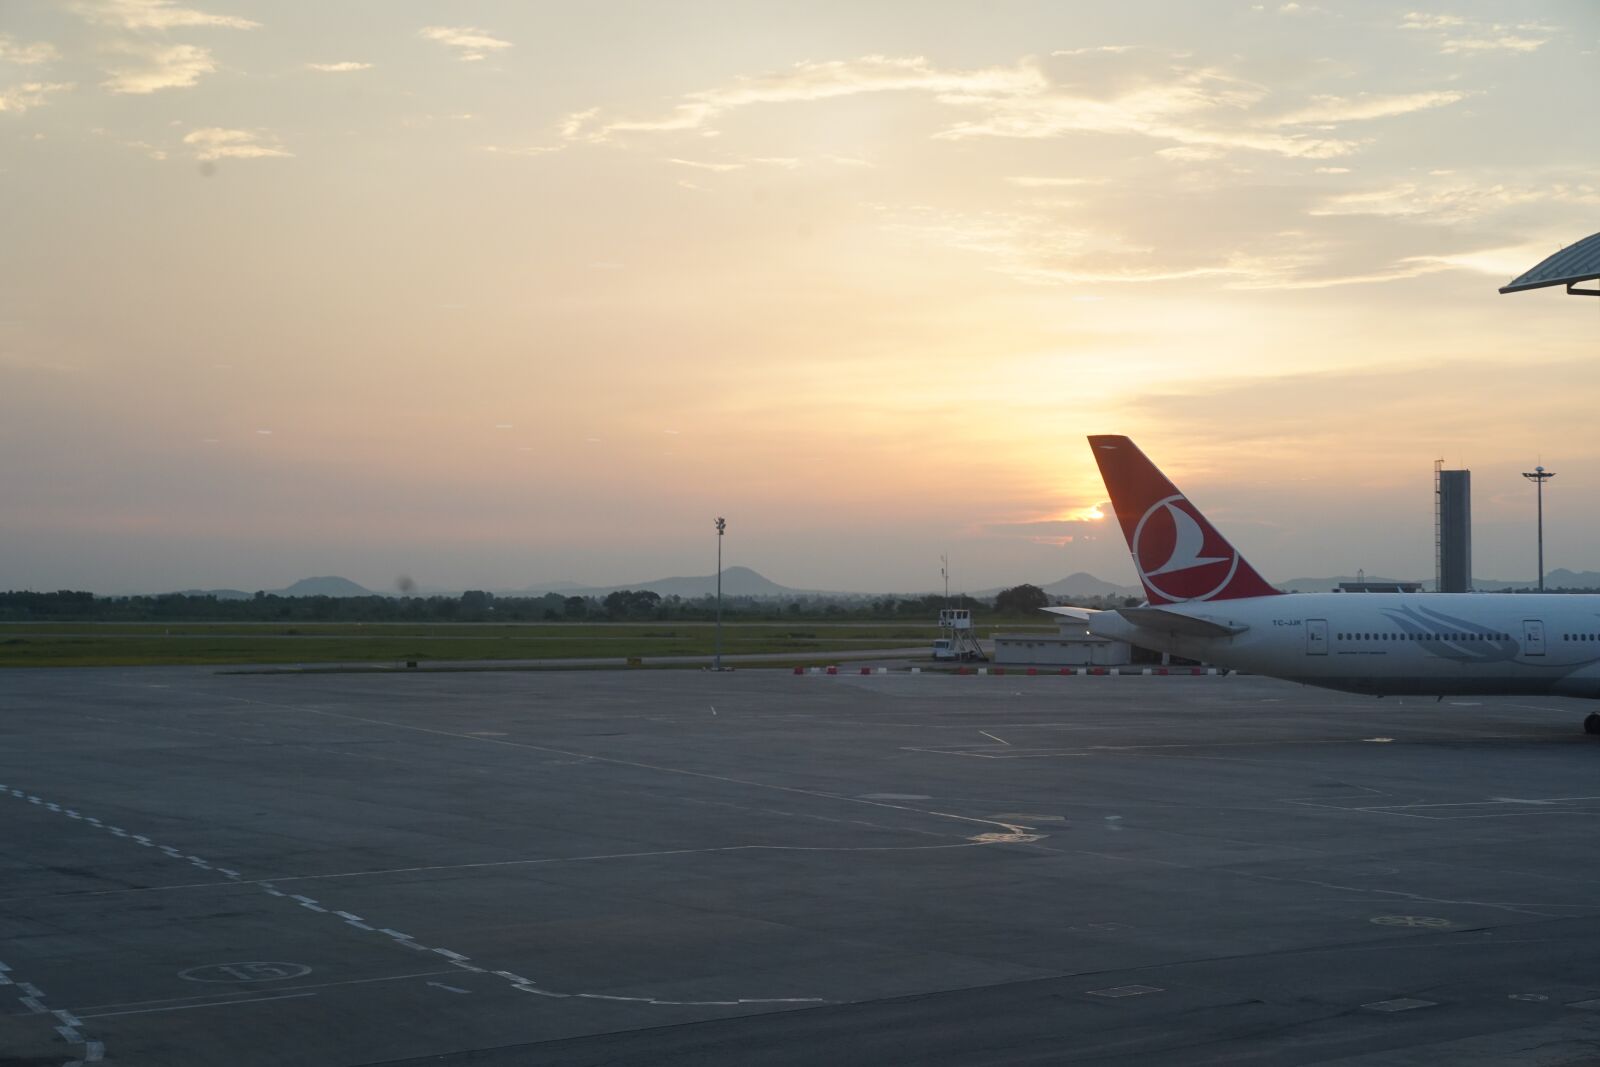 Sony Sonnar T* FE 55mm F1.8 ZA sample photo. Airport, airplane, sunset photography